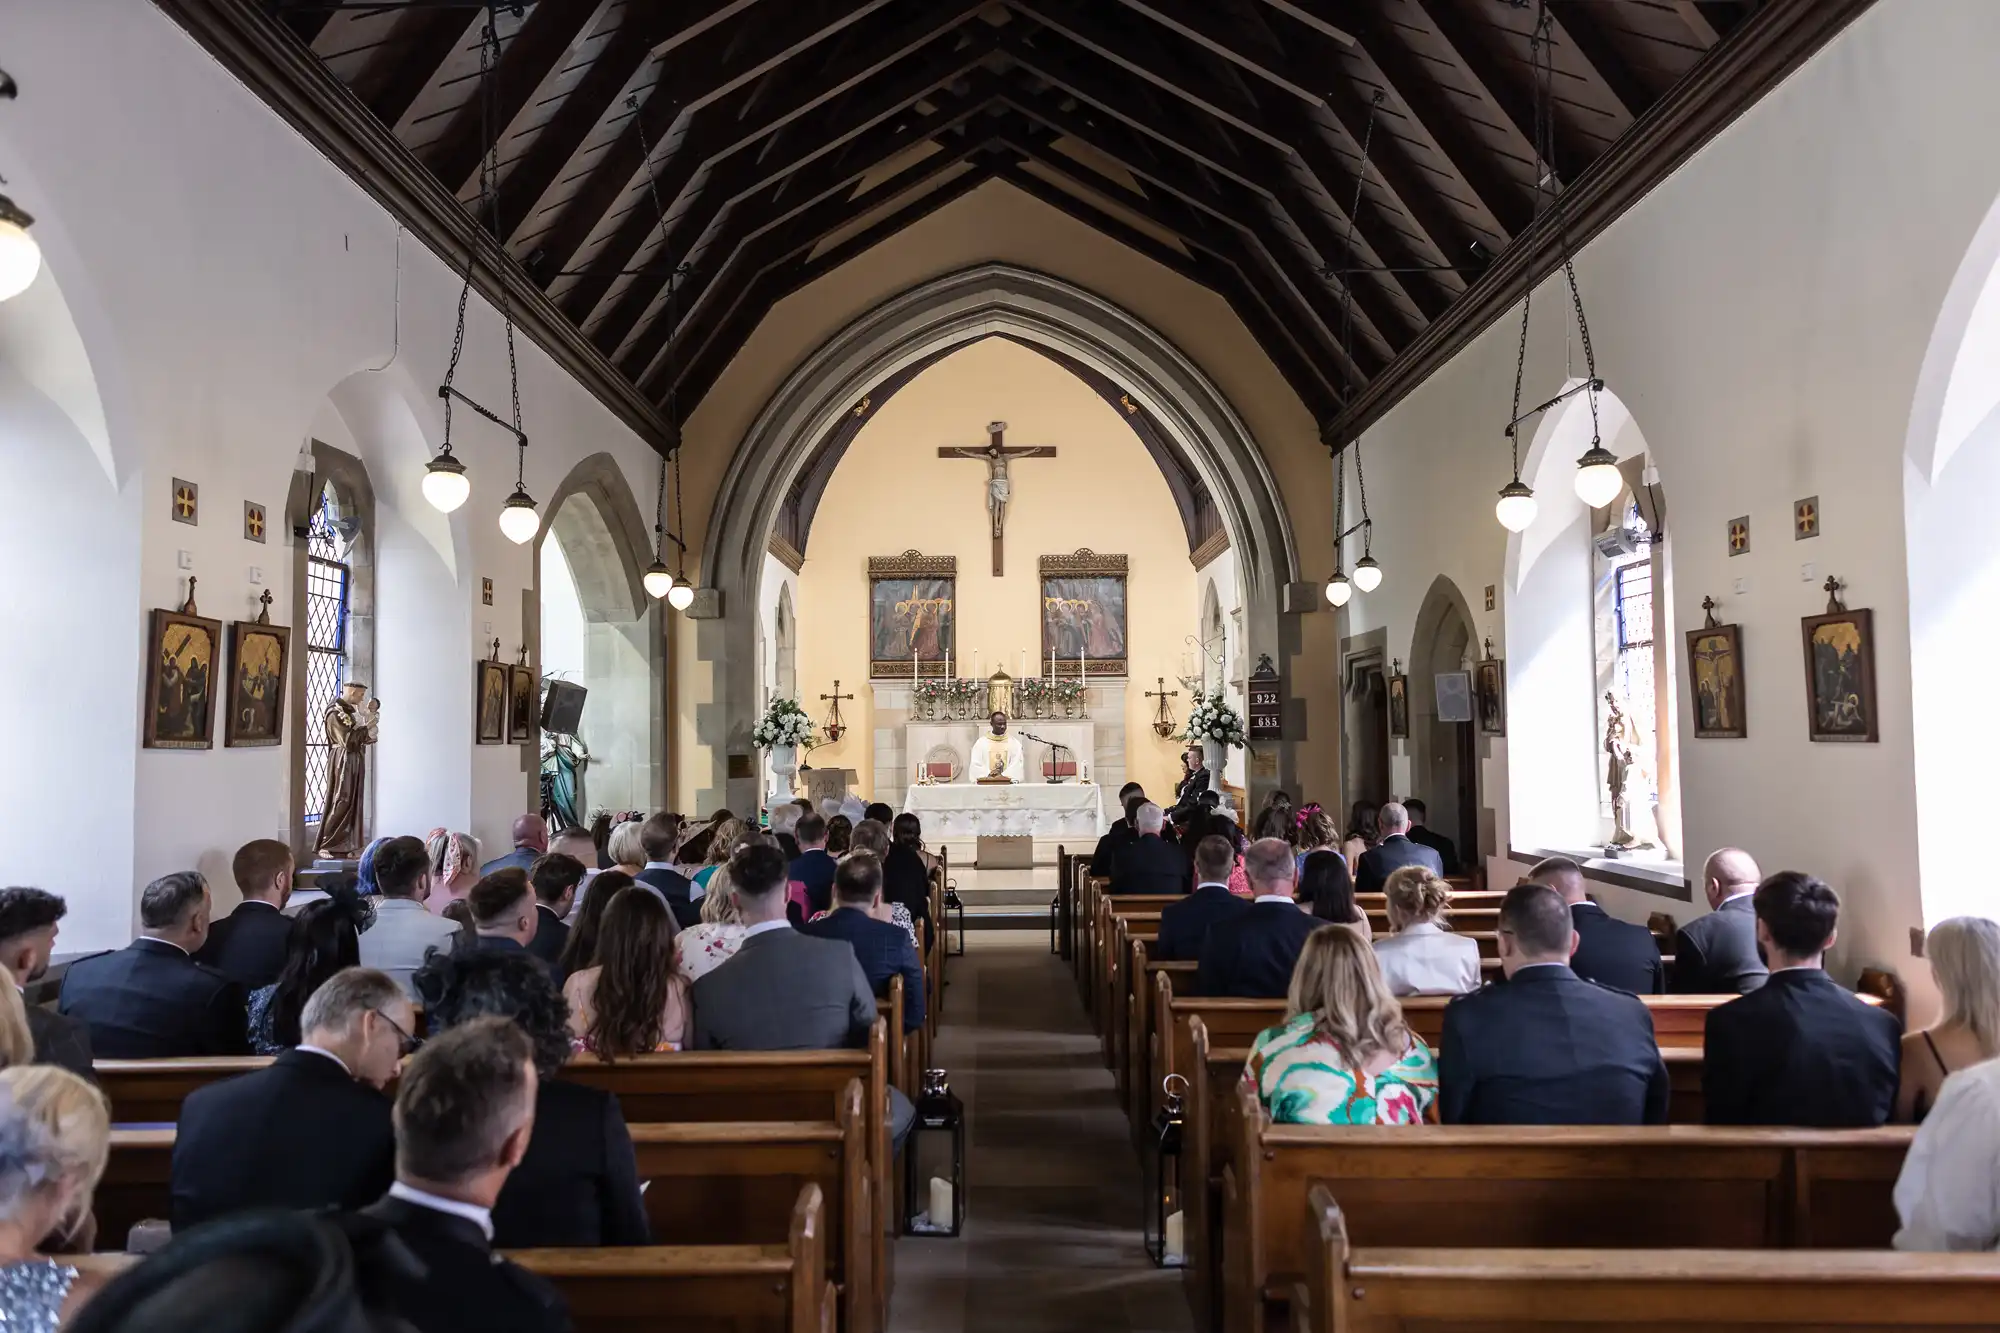 A wedding ceremony inside a church with guests seated in pews and a couple at the altar under a wooden arched ceiling.